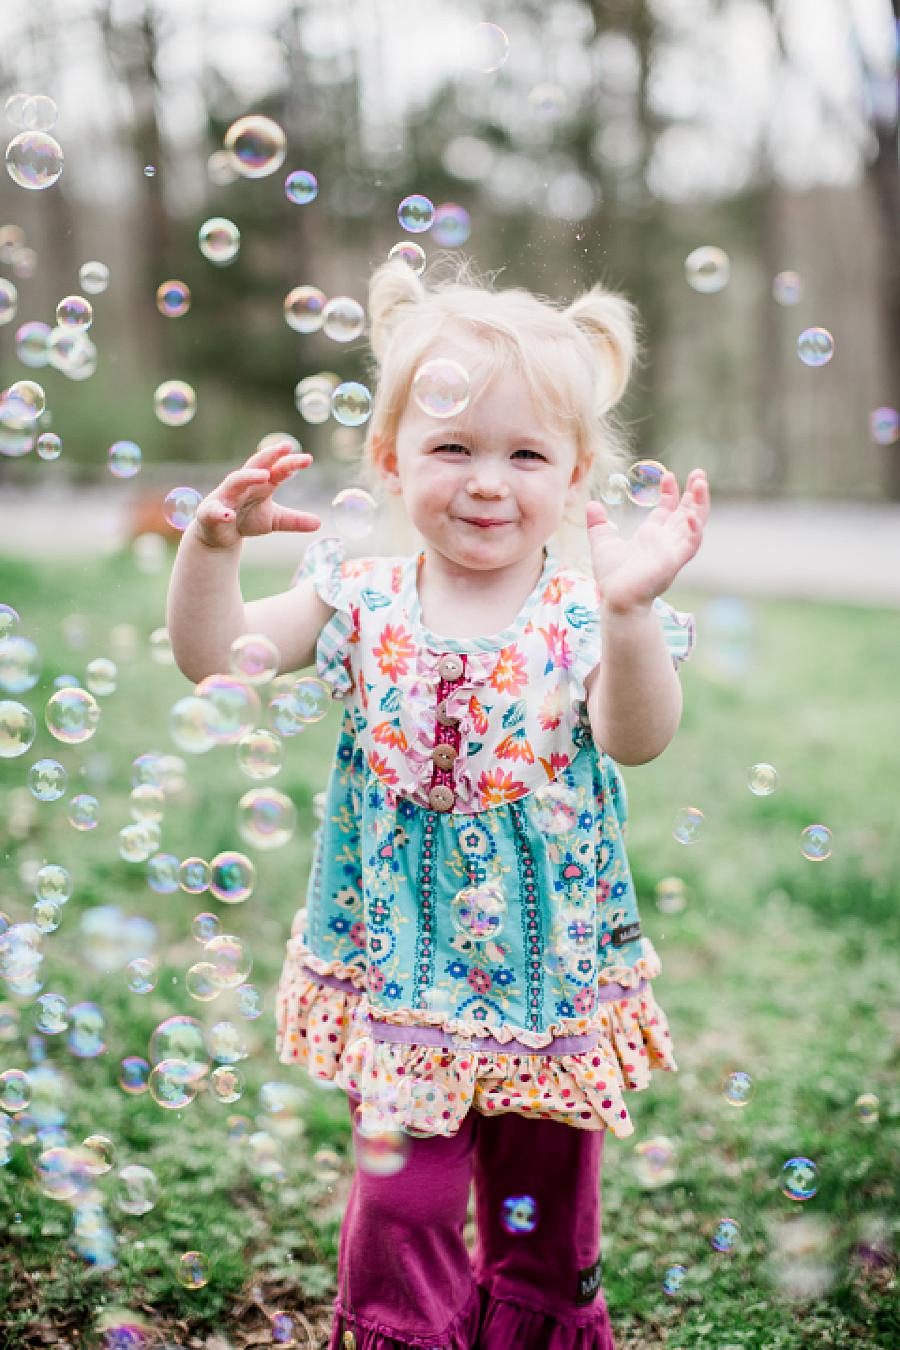 little girl in a cute outfit playing bubbles outside